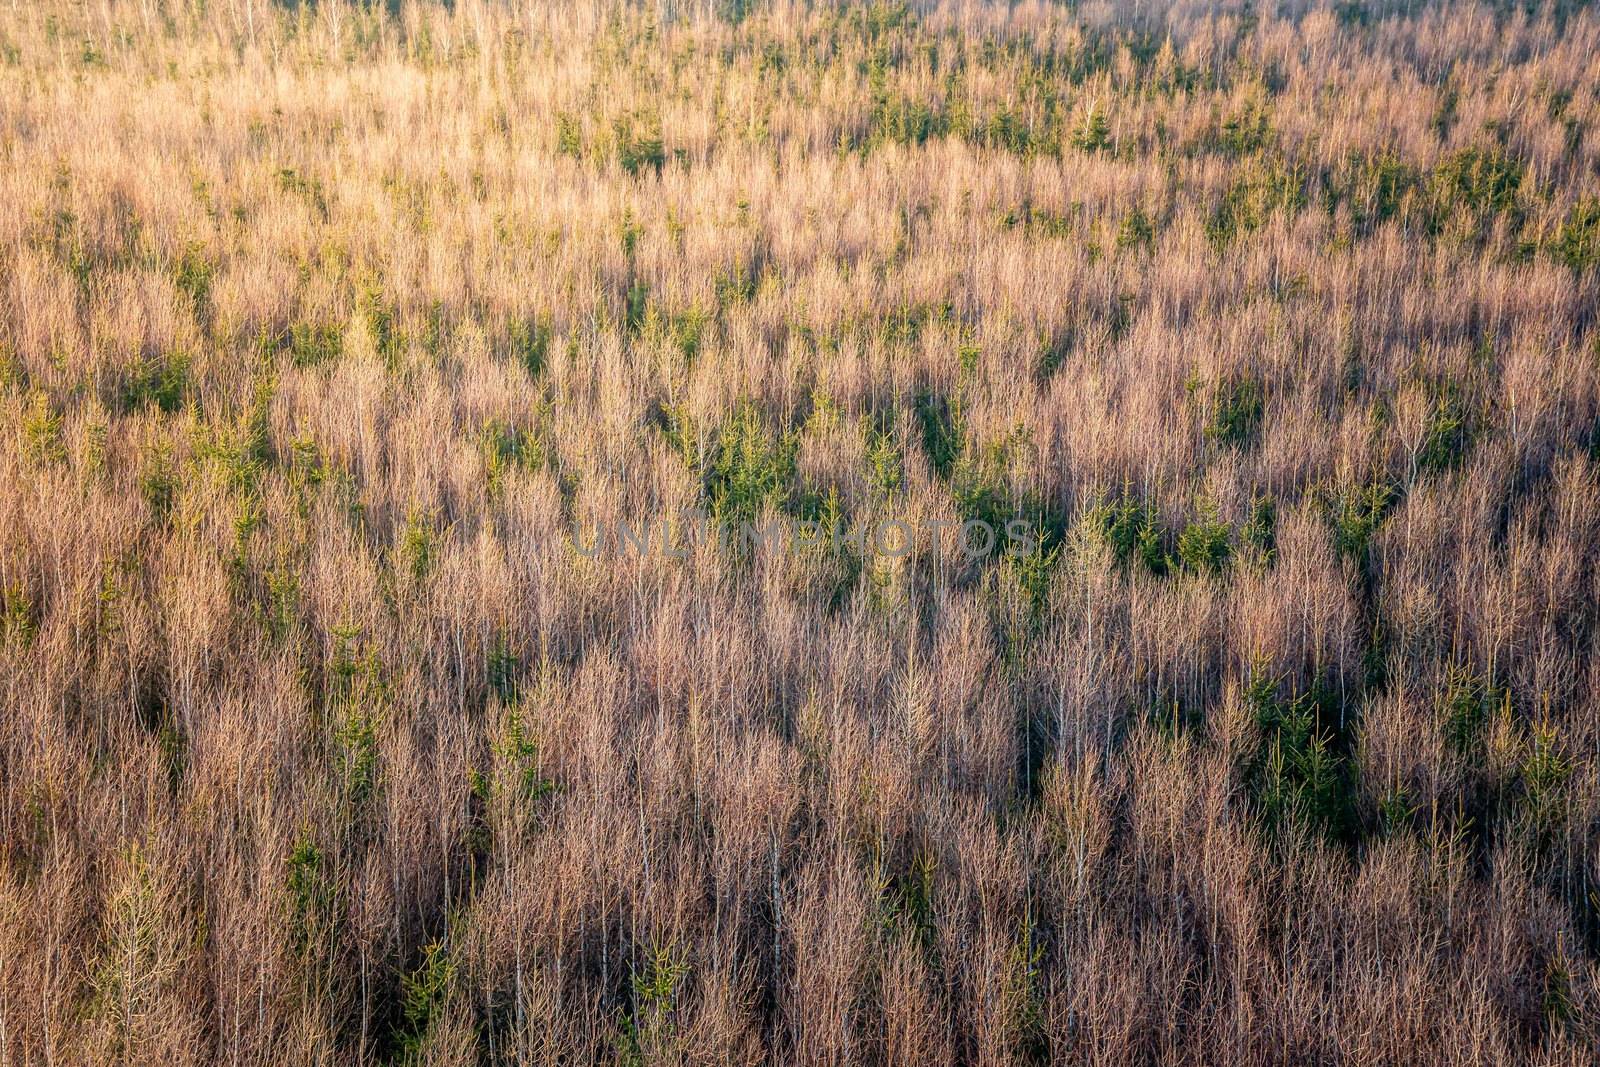 Aerial view of winter forrest with all the leaves fallen down. Mostly birch trees with some conifers. Nice Trees texture of forrest texture. by petrsvoboda91